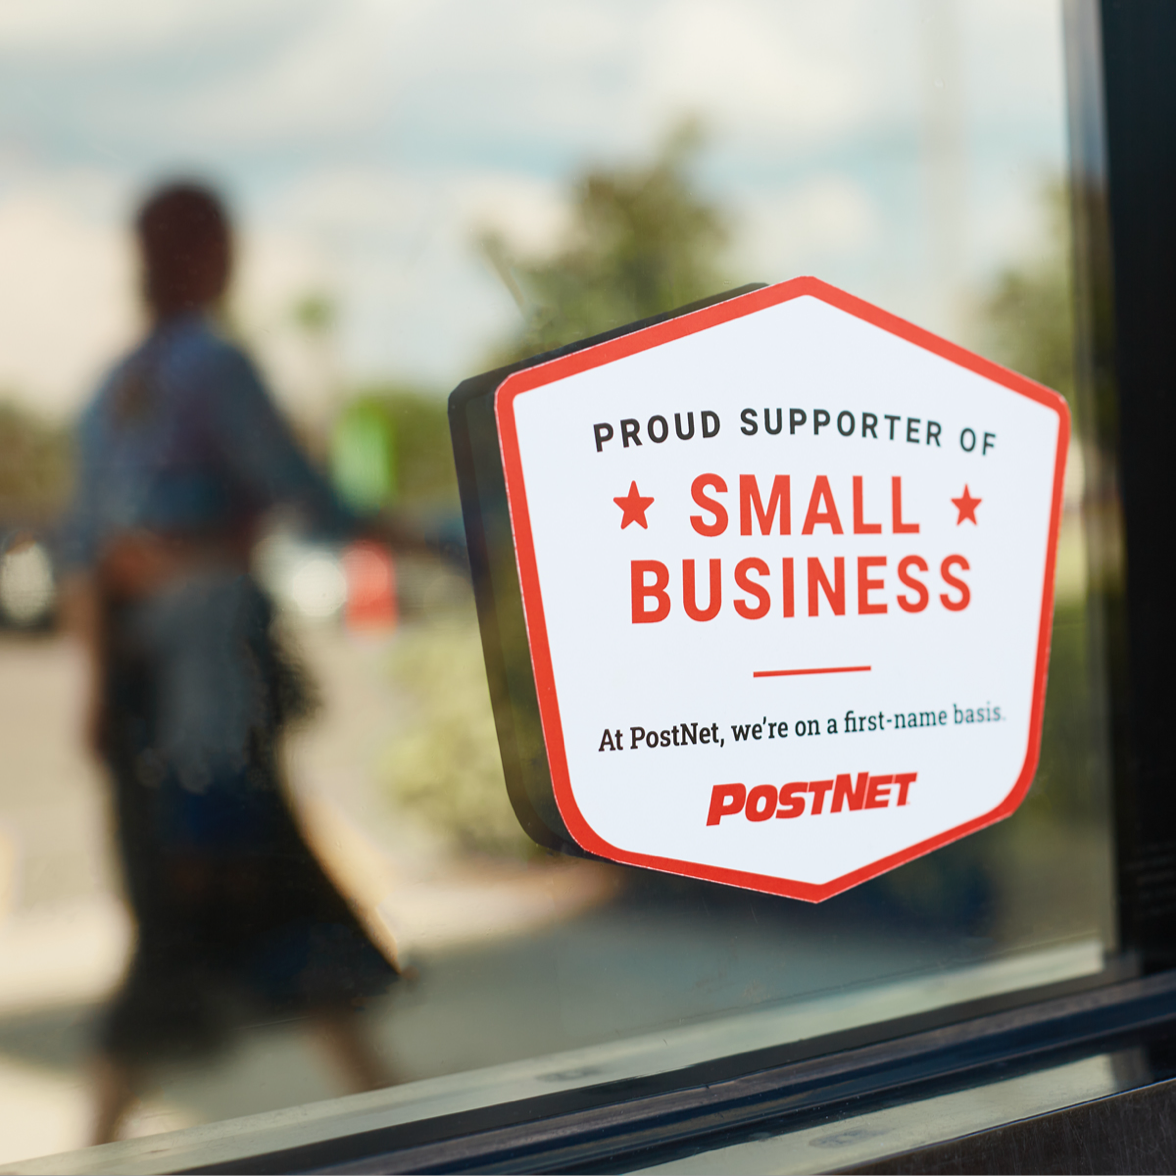 PostNet sticker on the outisde of the storefront that says 'proud supporter of small business'